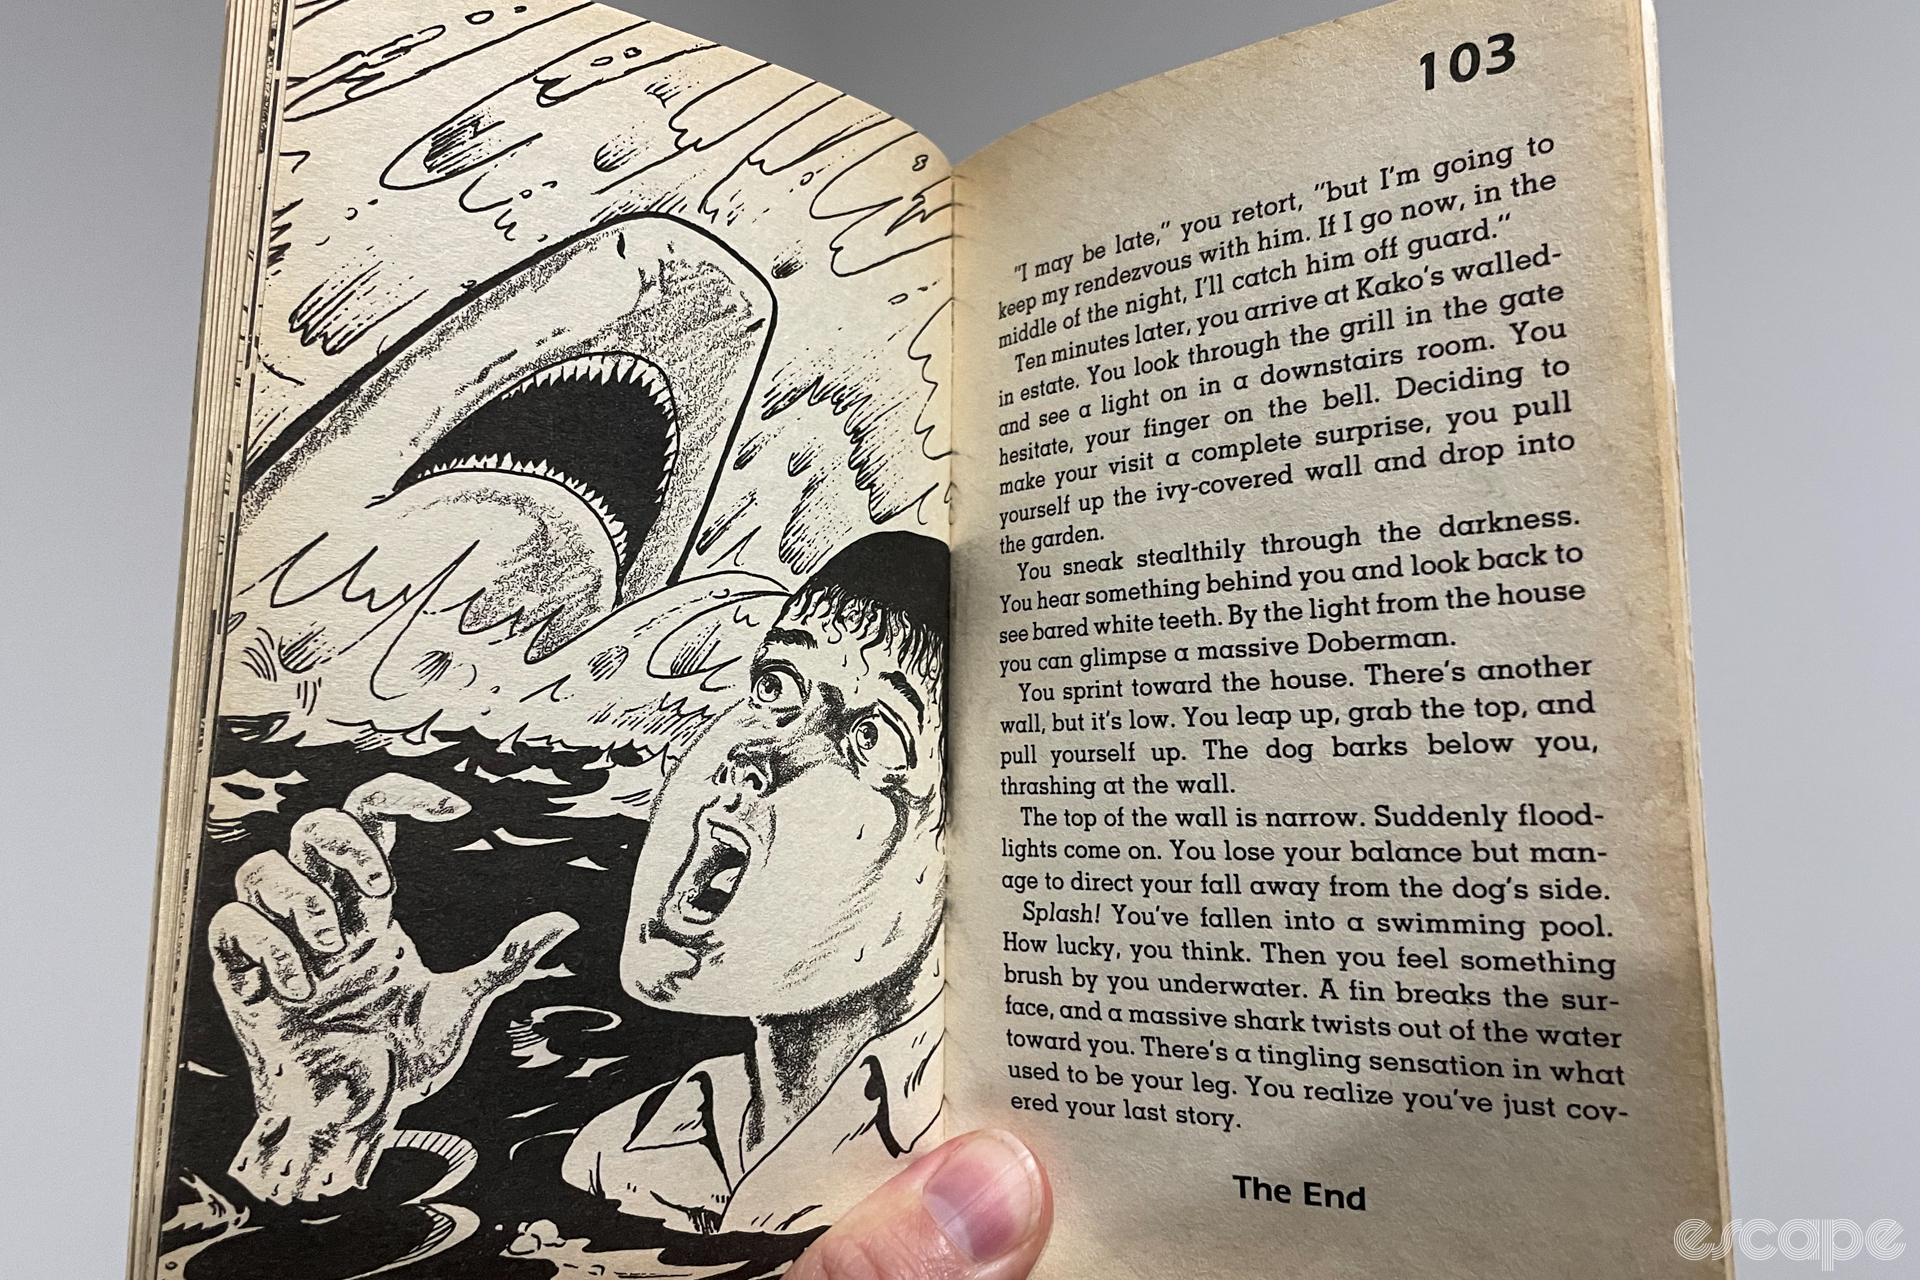 A photo of the inside of a book. On the left page there's an illustration of a shark about to eat a concerned-looking man. On the right page is text from the book describing the scene.